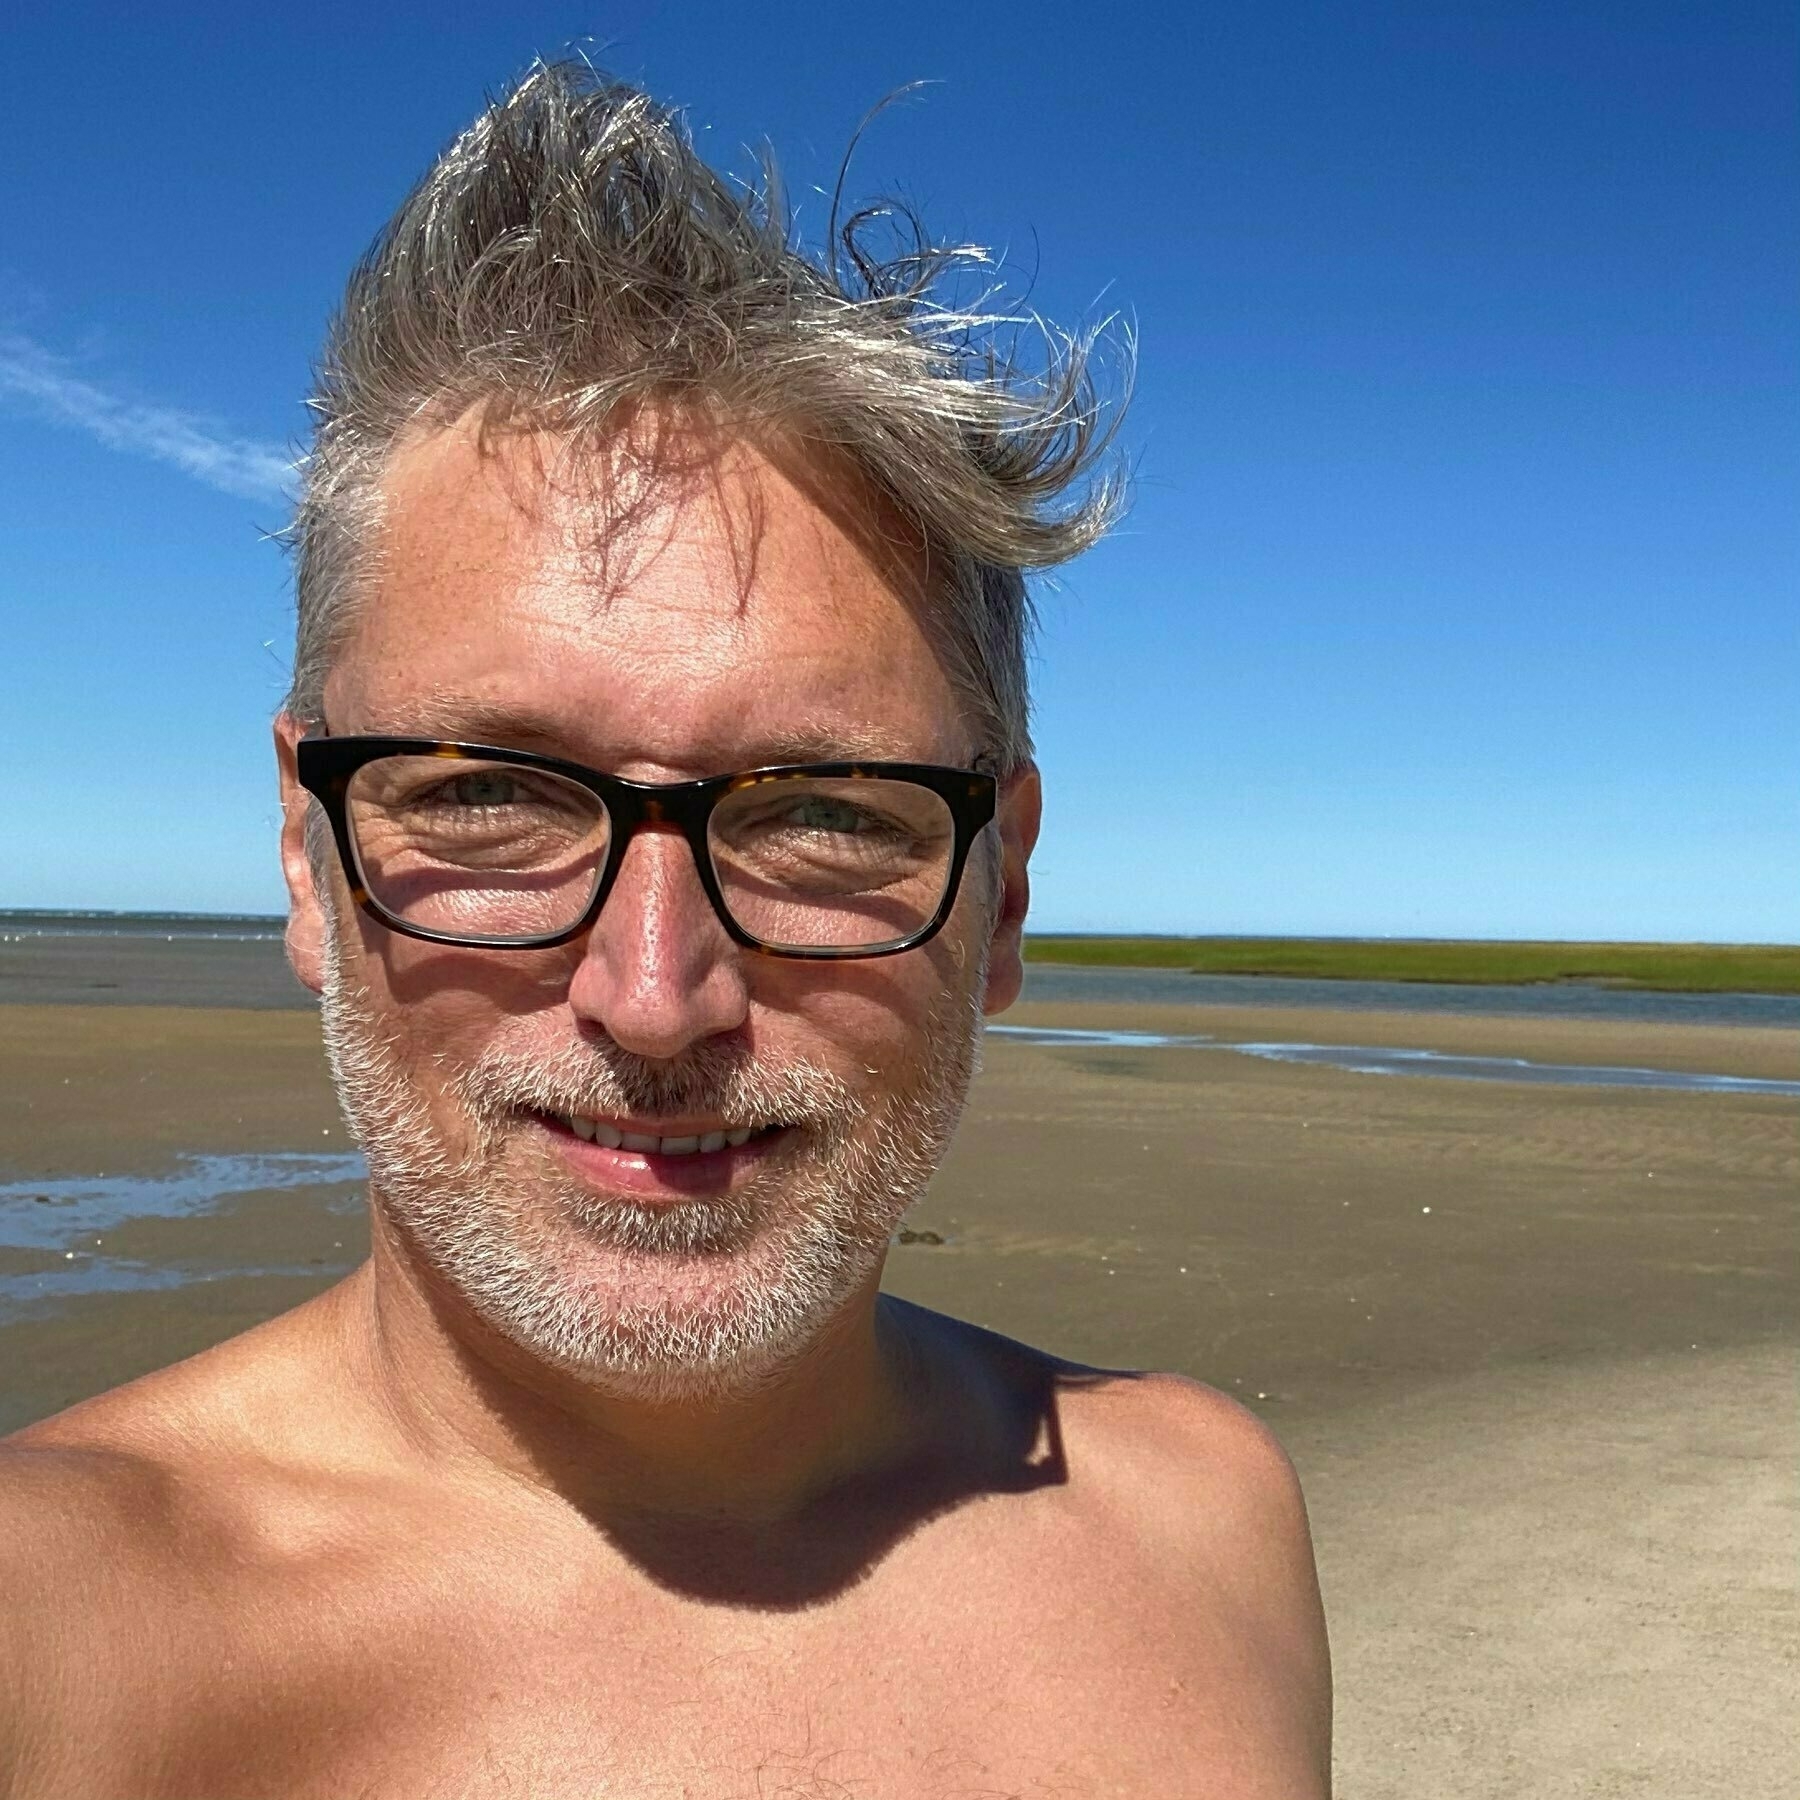 Selfie with no shirt, hair pointing in two Got my hair fixed up real nice. directions, and a long flat beach behind me.